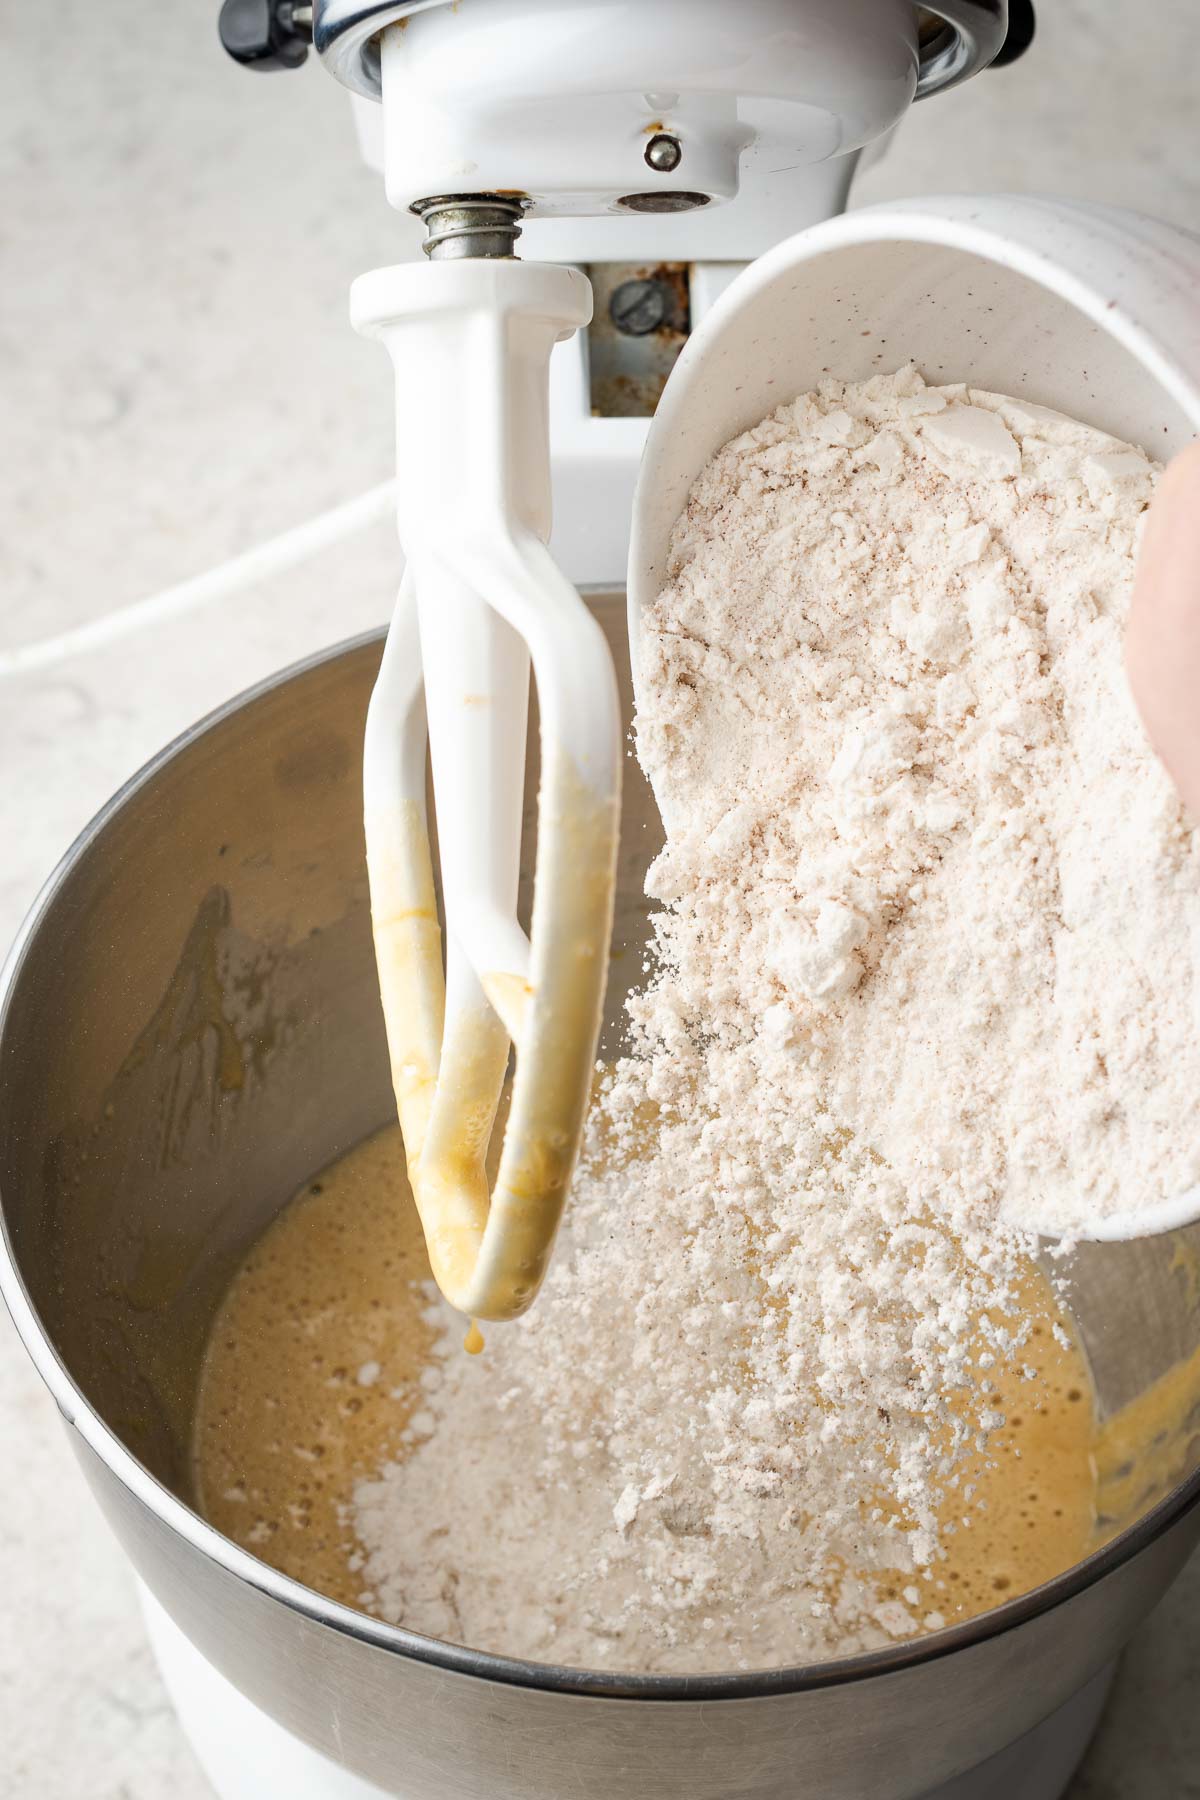 Pouring dry ingredients into cake batter in a stand mixer.